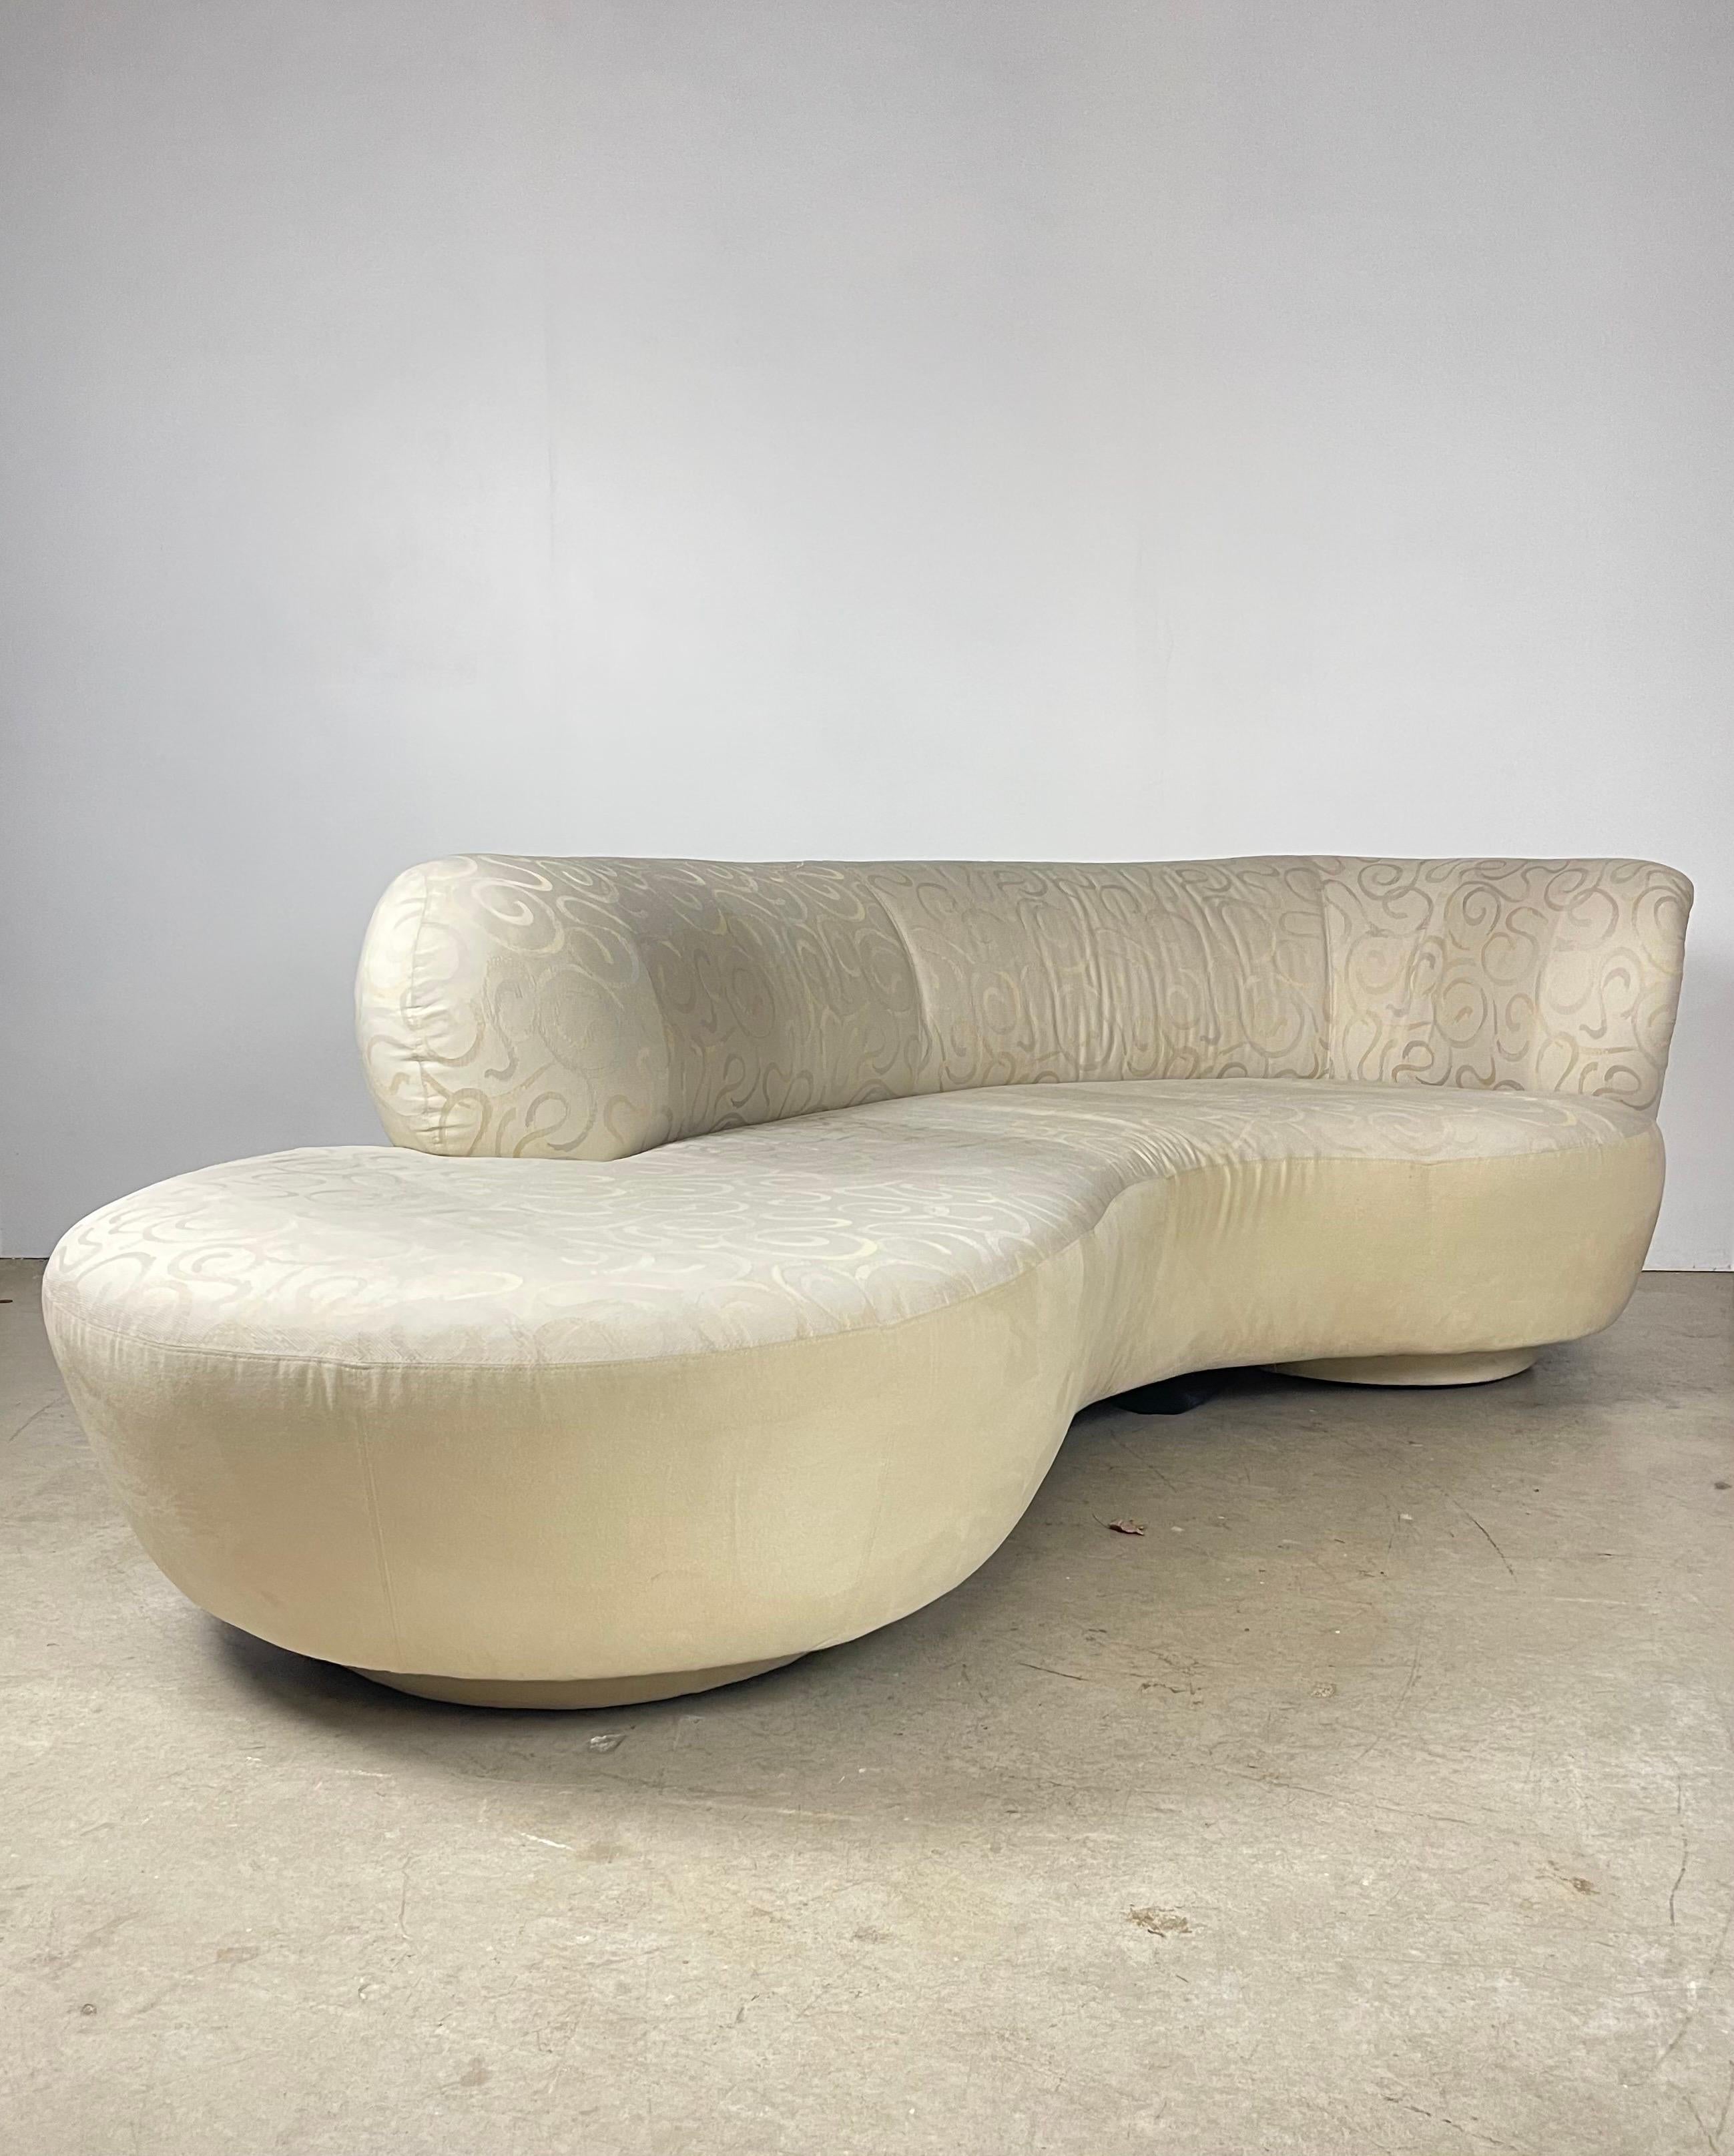 Serpentine sofa design often attributed to the late Vladimir Kagan. No manufacturers tags. Original upholstery, shows wear. Recommended to be replaced. 